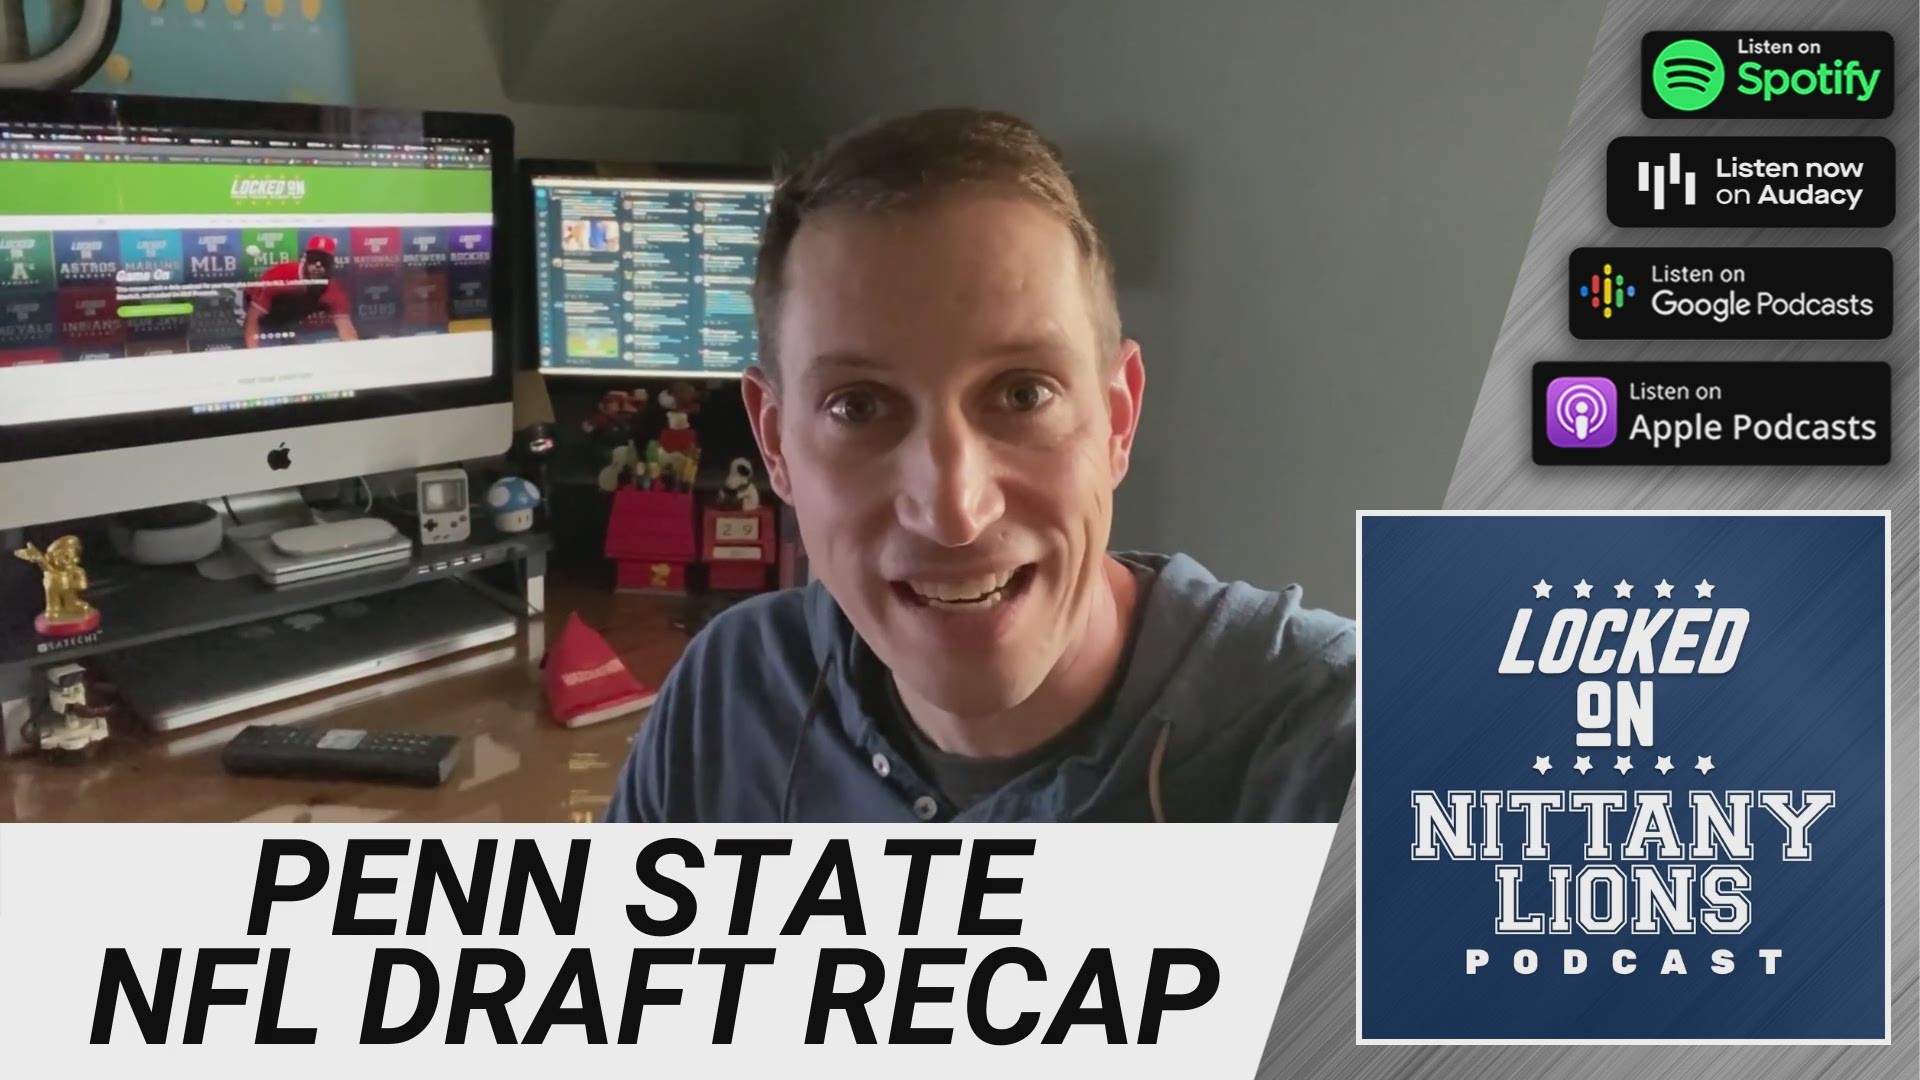 The host of the Locked On Nittany Lions podcast reacts to six players getting picked on day three of the NFL Draft.